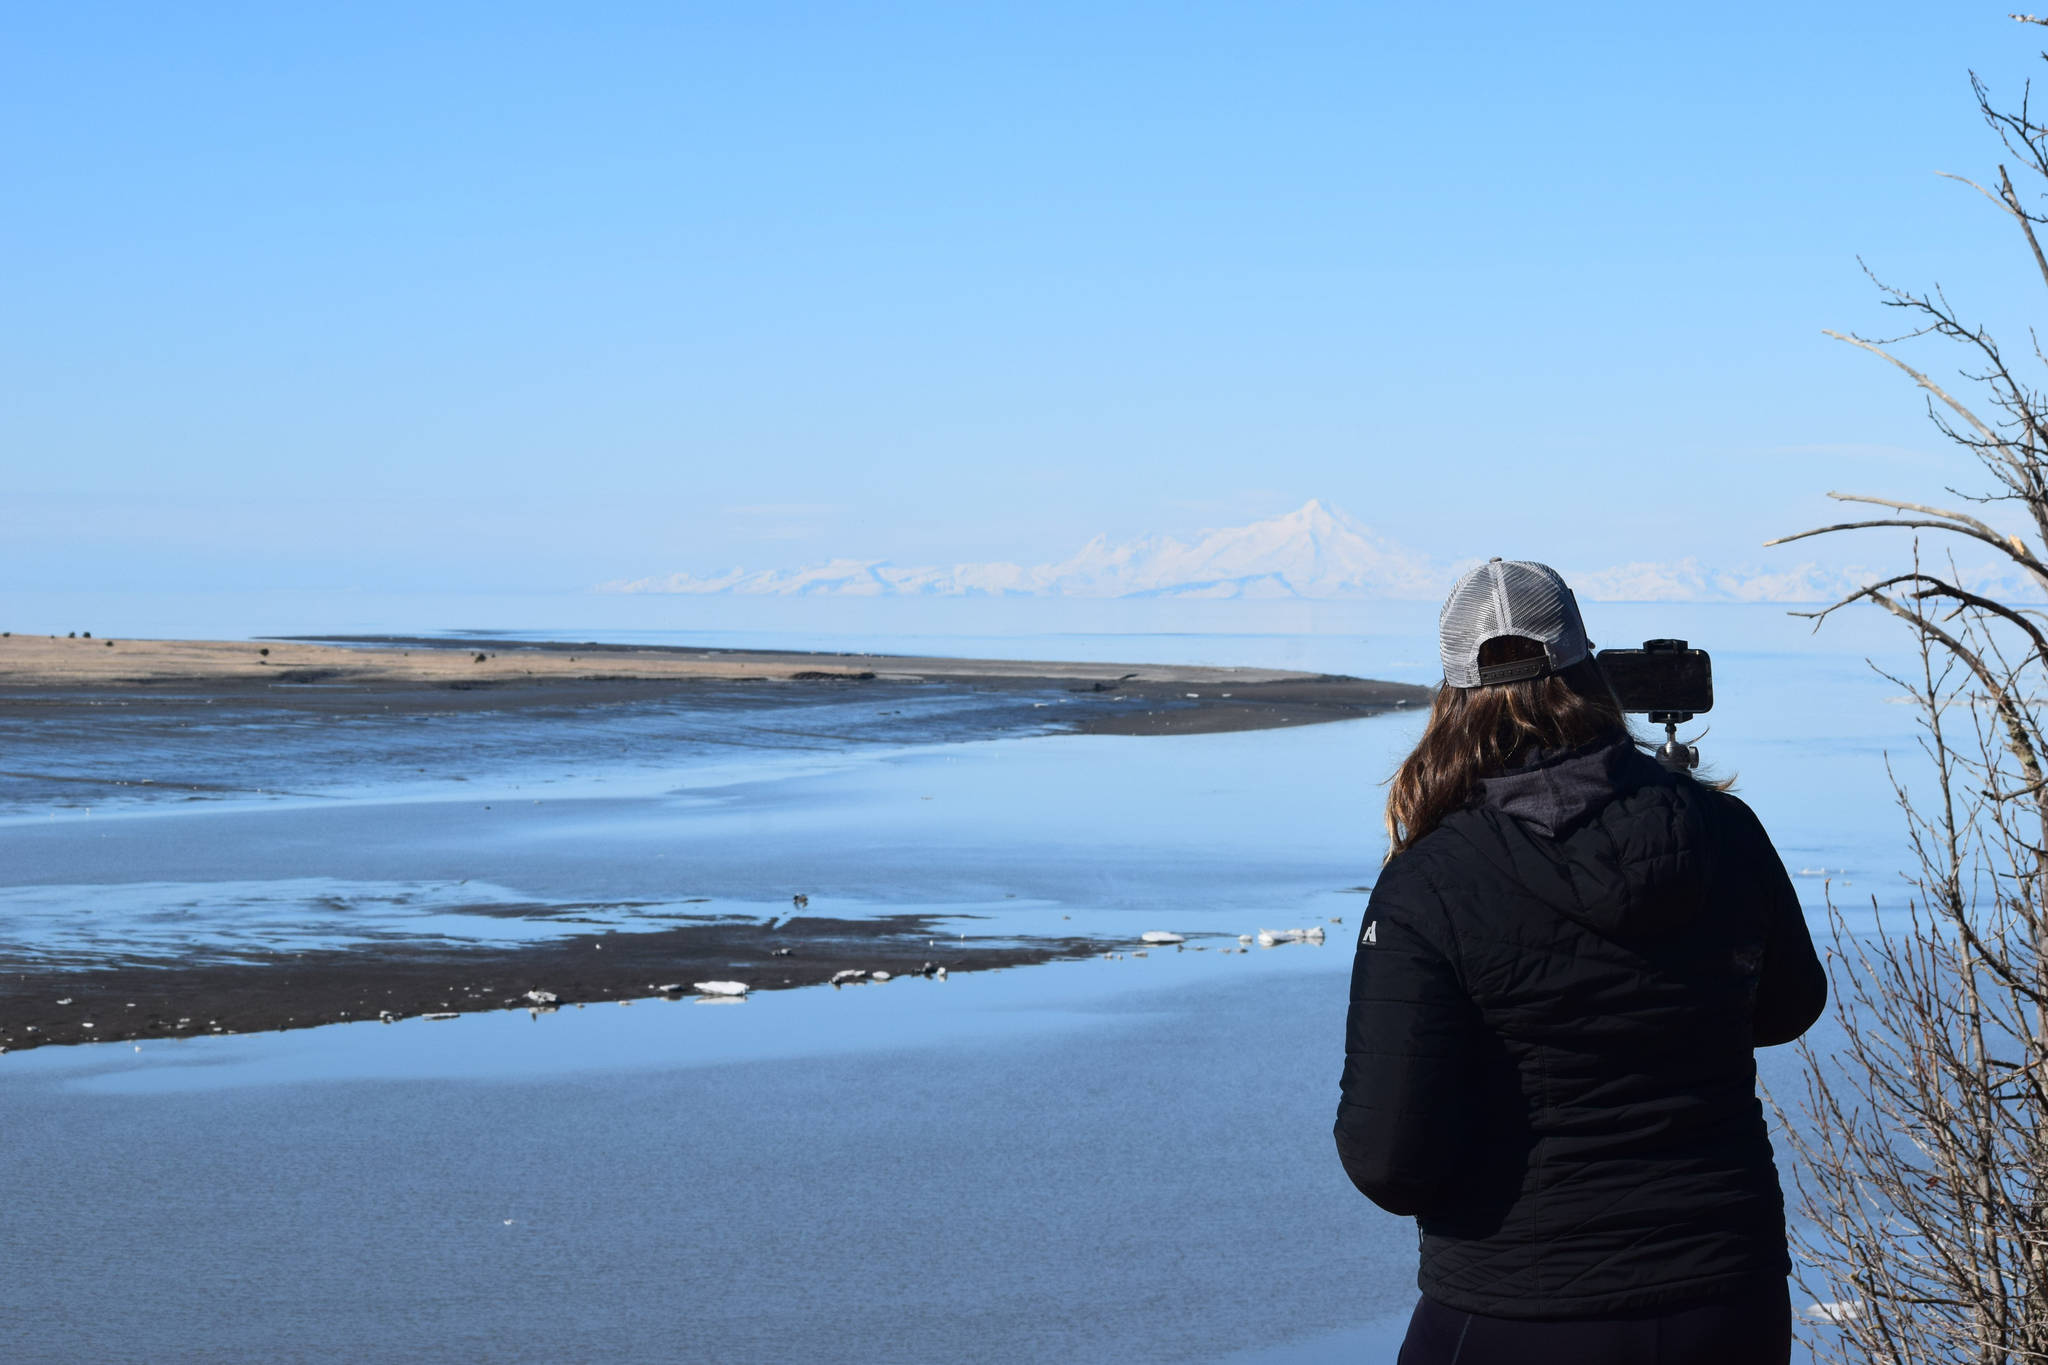 Suzanne Steinert watches as beluga whales swim up the Kenai River on Saturday, April 24, 2021. She and her volunteer team at the Beluga Whale Alliance monitor the whales in the Cook Inlet. (Photo by Camille Botello/Peninsula Clarion)